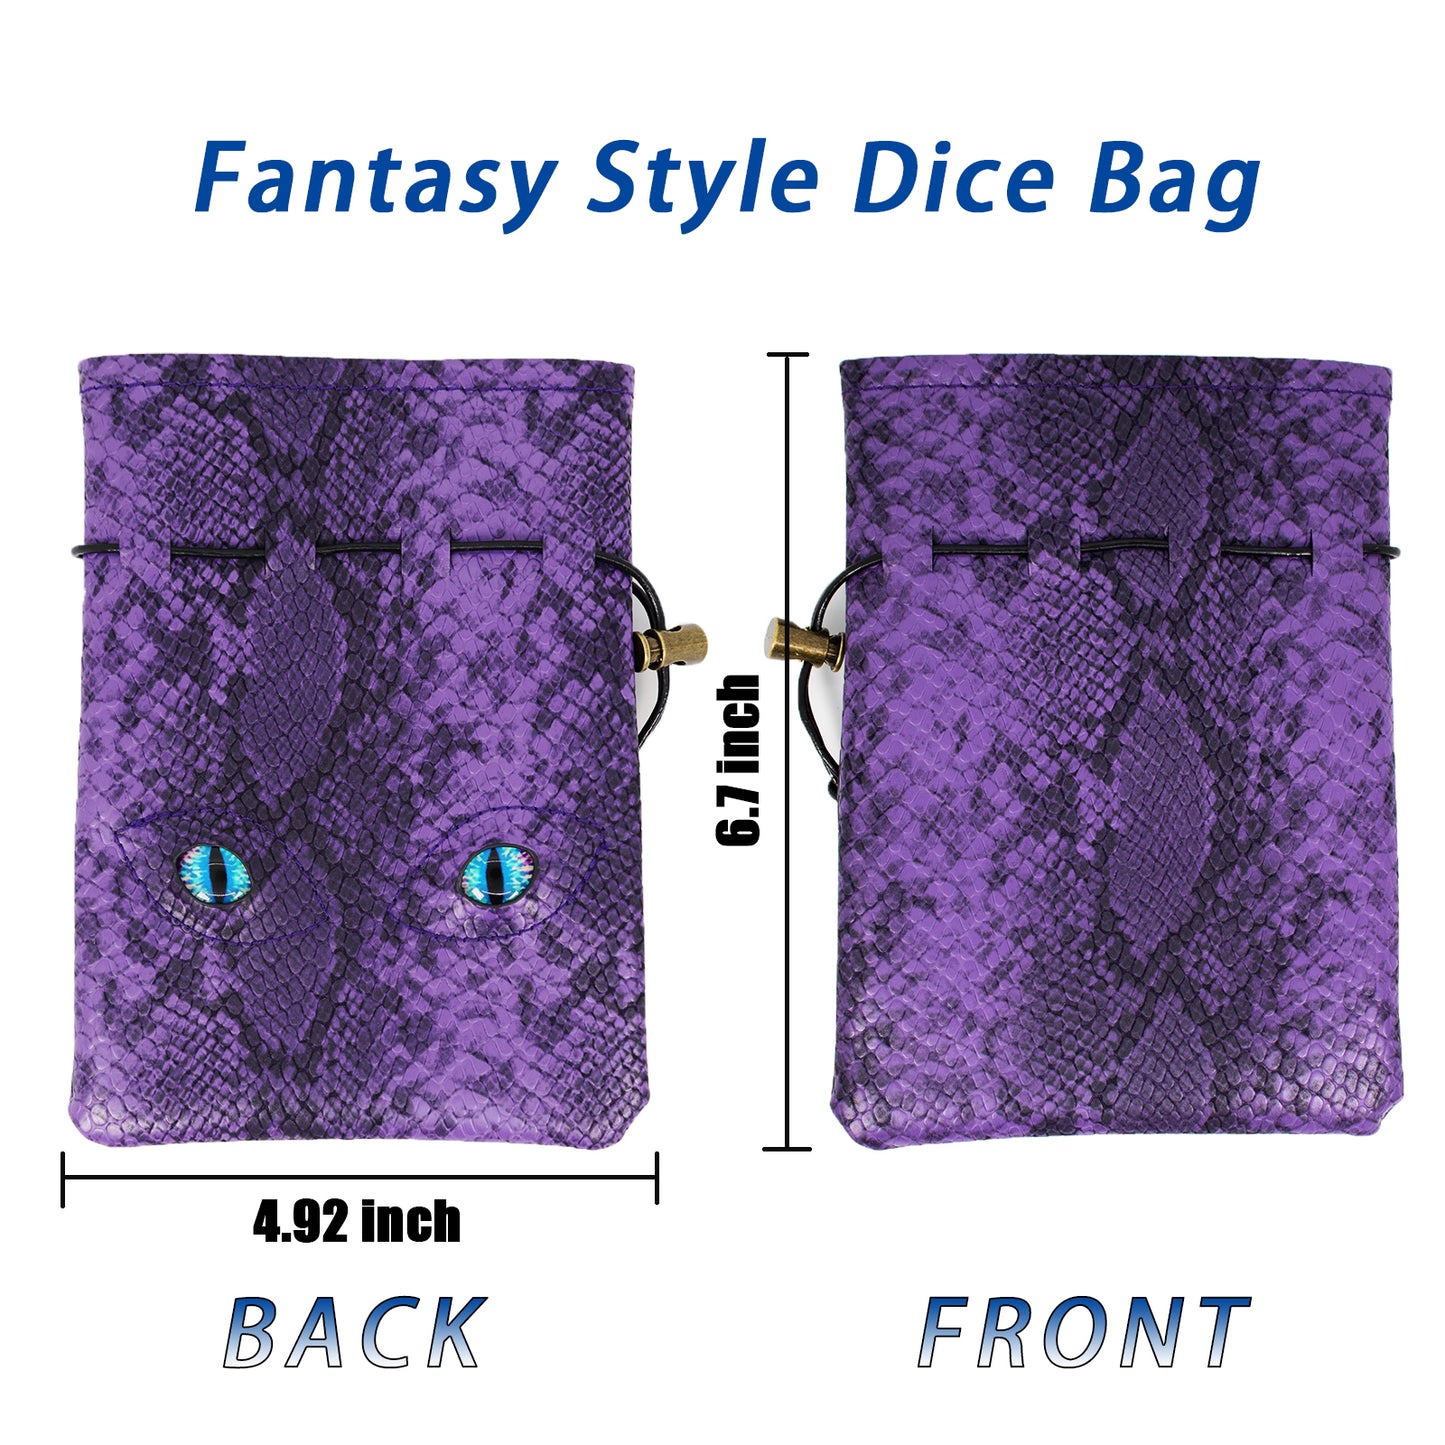 Byhoo DND Dice Bag Can Cover 6 Dice Sets, Glow in The Dark Eyes D and D Dice Storage Pouch, Purple Dragon Leather Coins Bag for Fantasy Dragons and Dungeons Games Accessories, Drawstring Dice Pouch